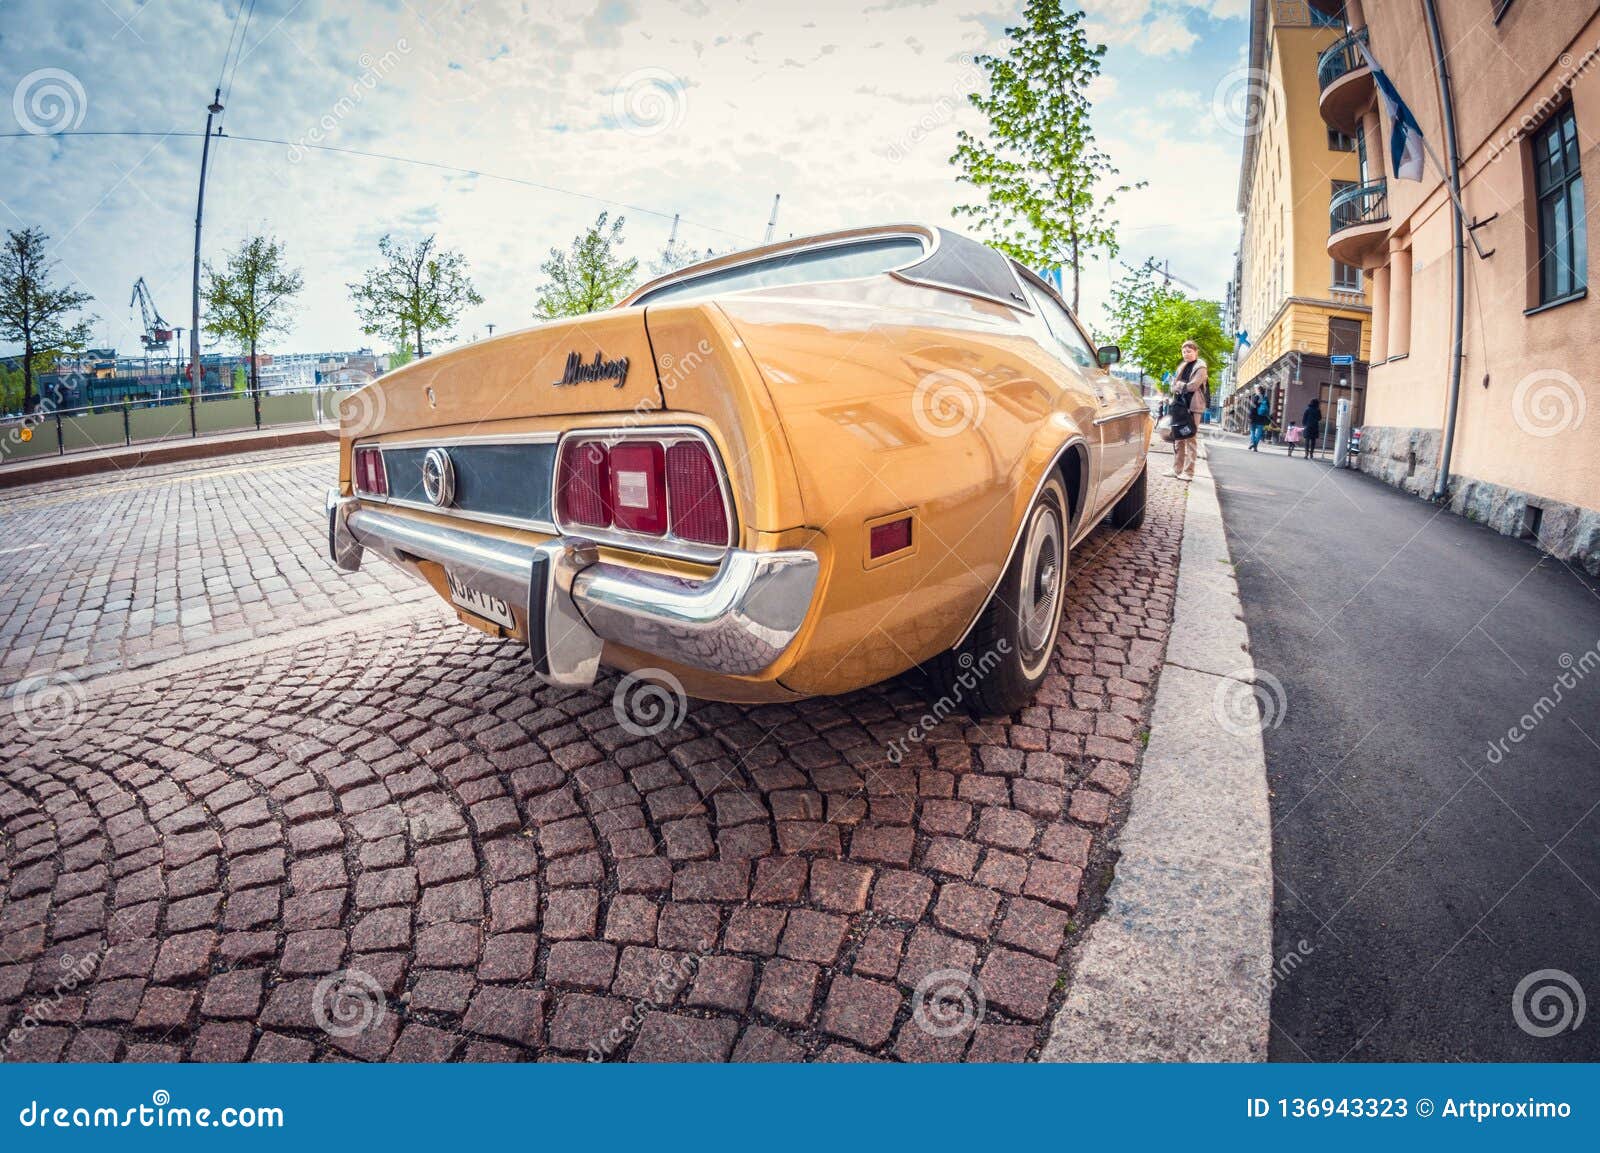 Download Helsinki, Finland - May 16, 2016: Old Car Ford Mustang. Distortion Perspective Fisheye Lens ...